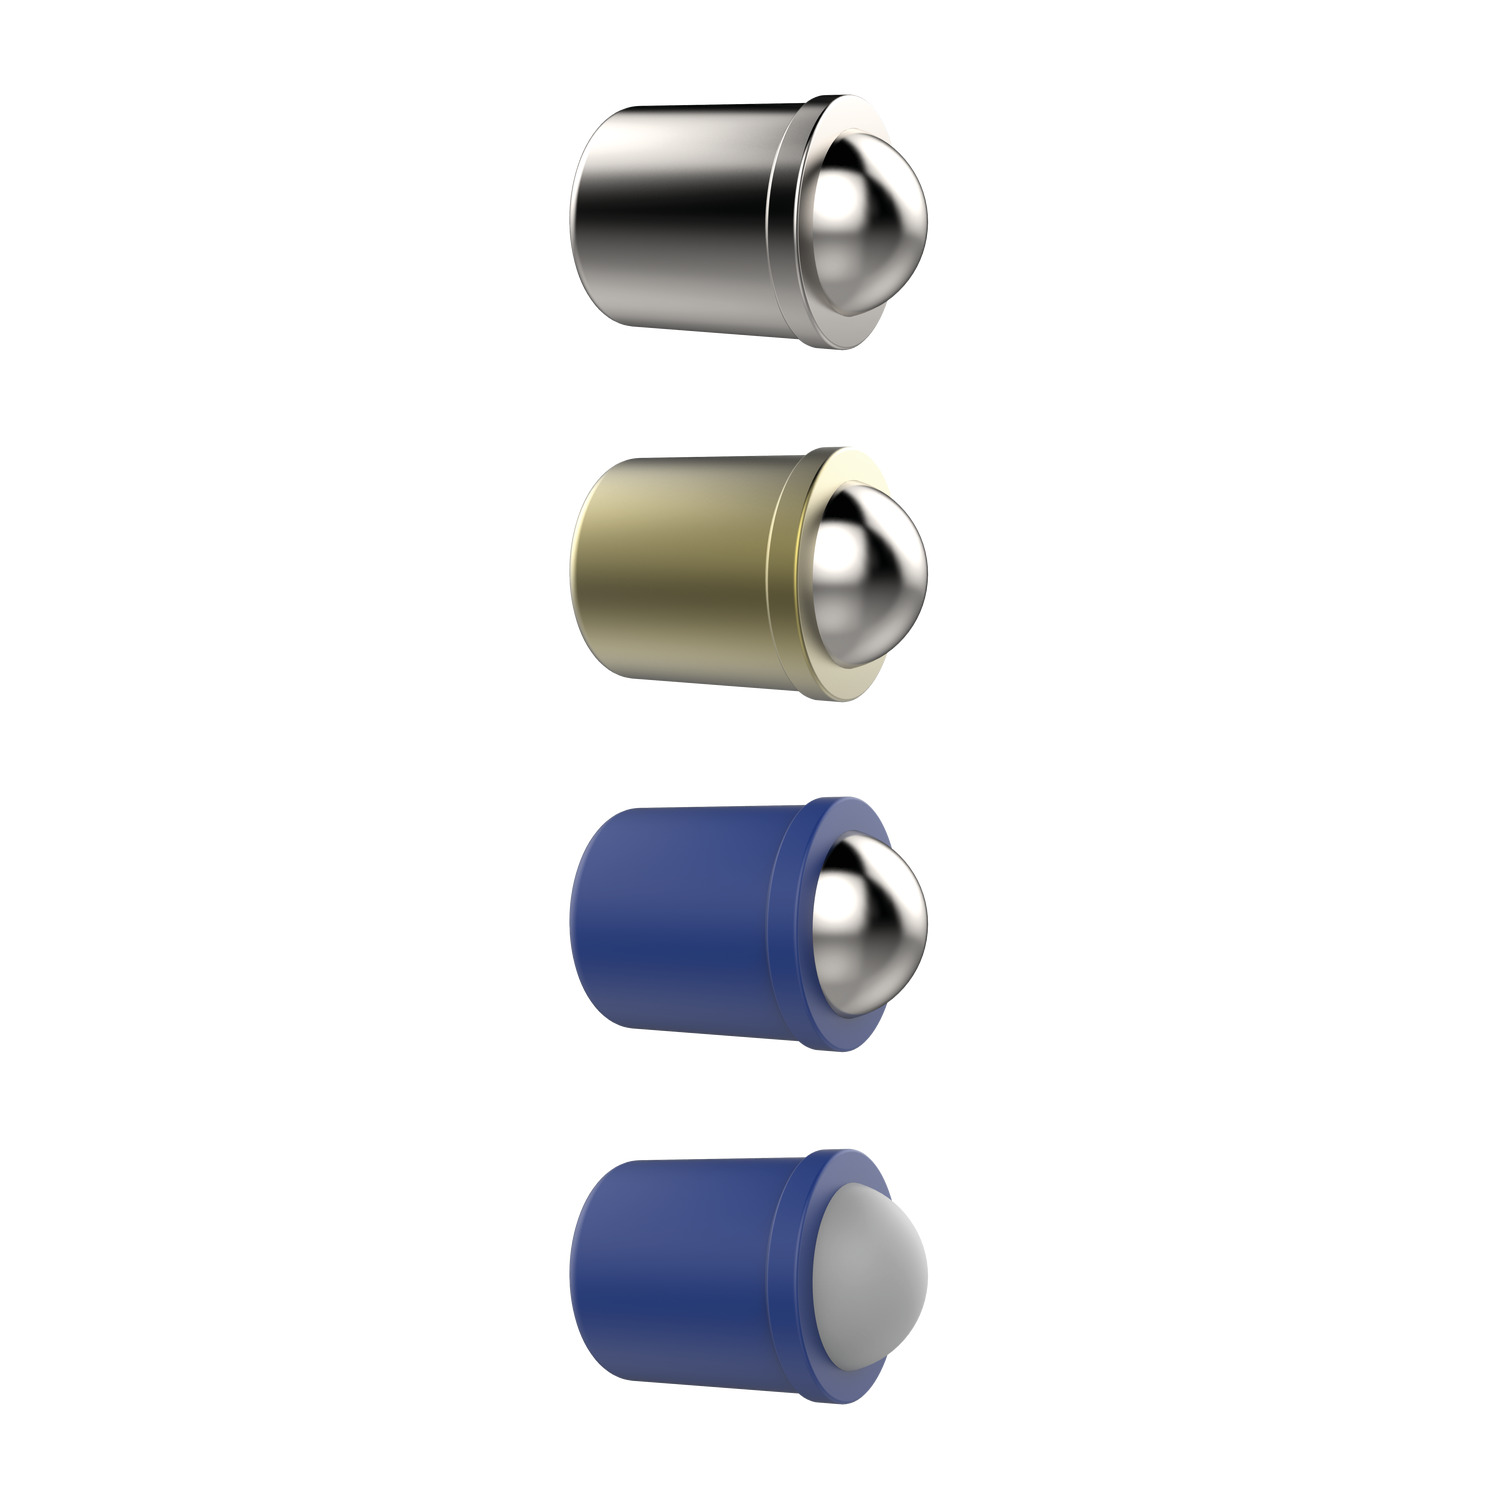 Spring Plungers A popular push fit spring plunger, a wide range of material variations including stainless steel, brass and plastic.